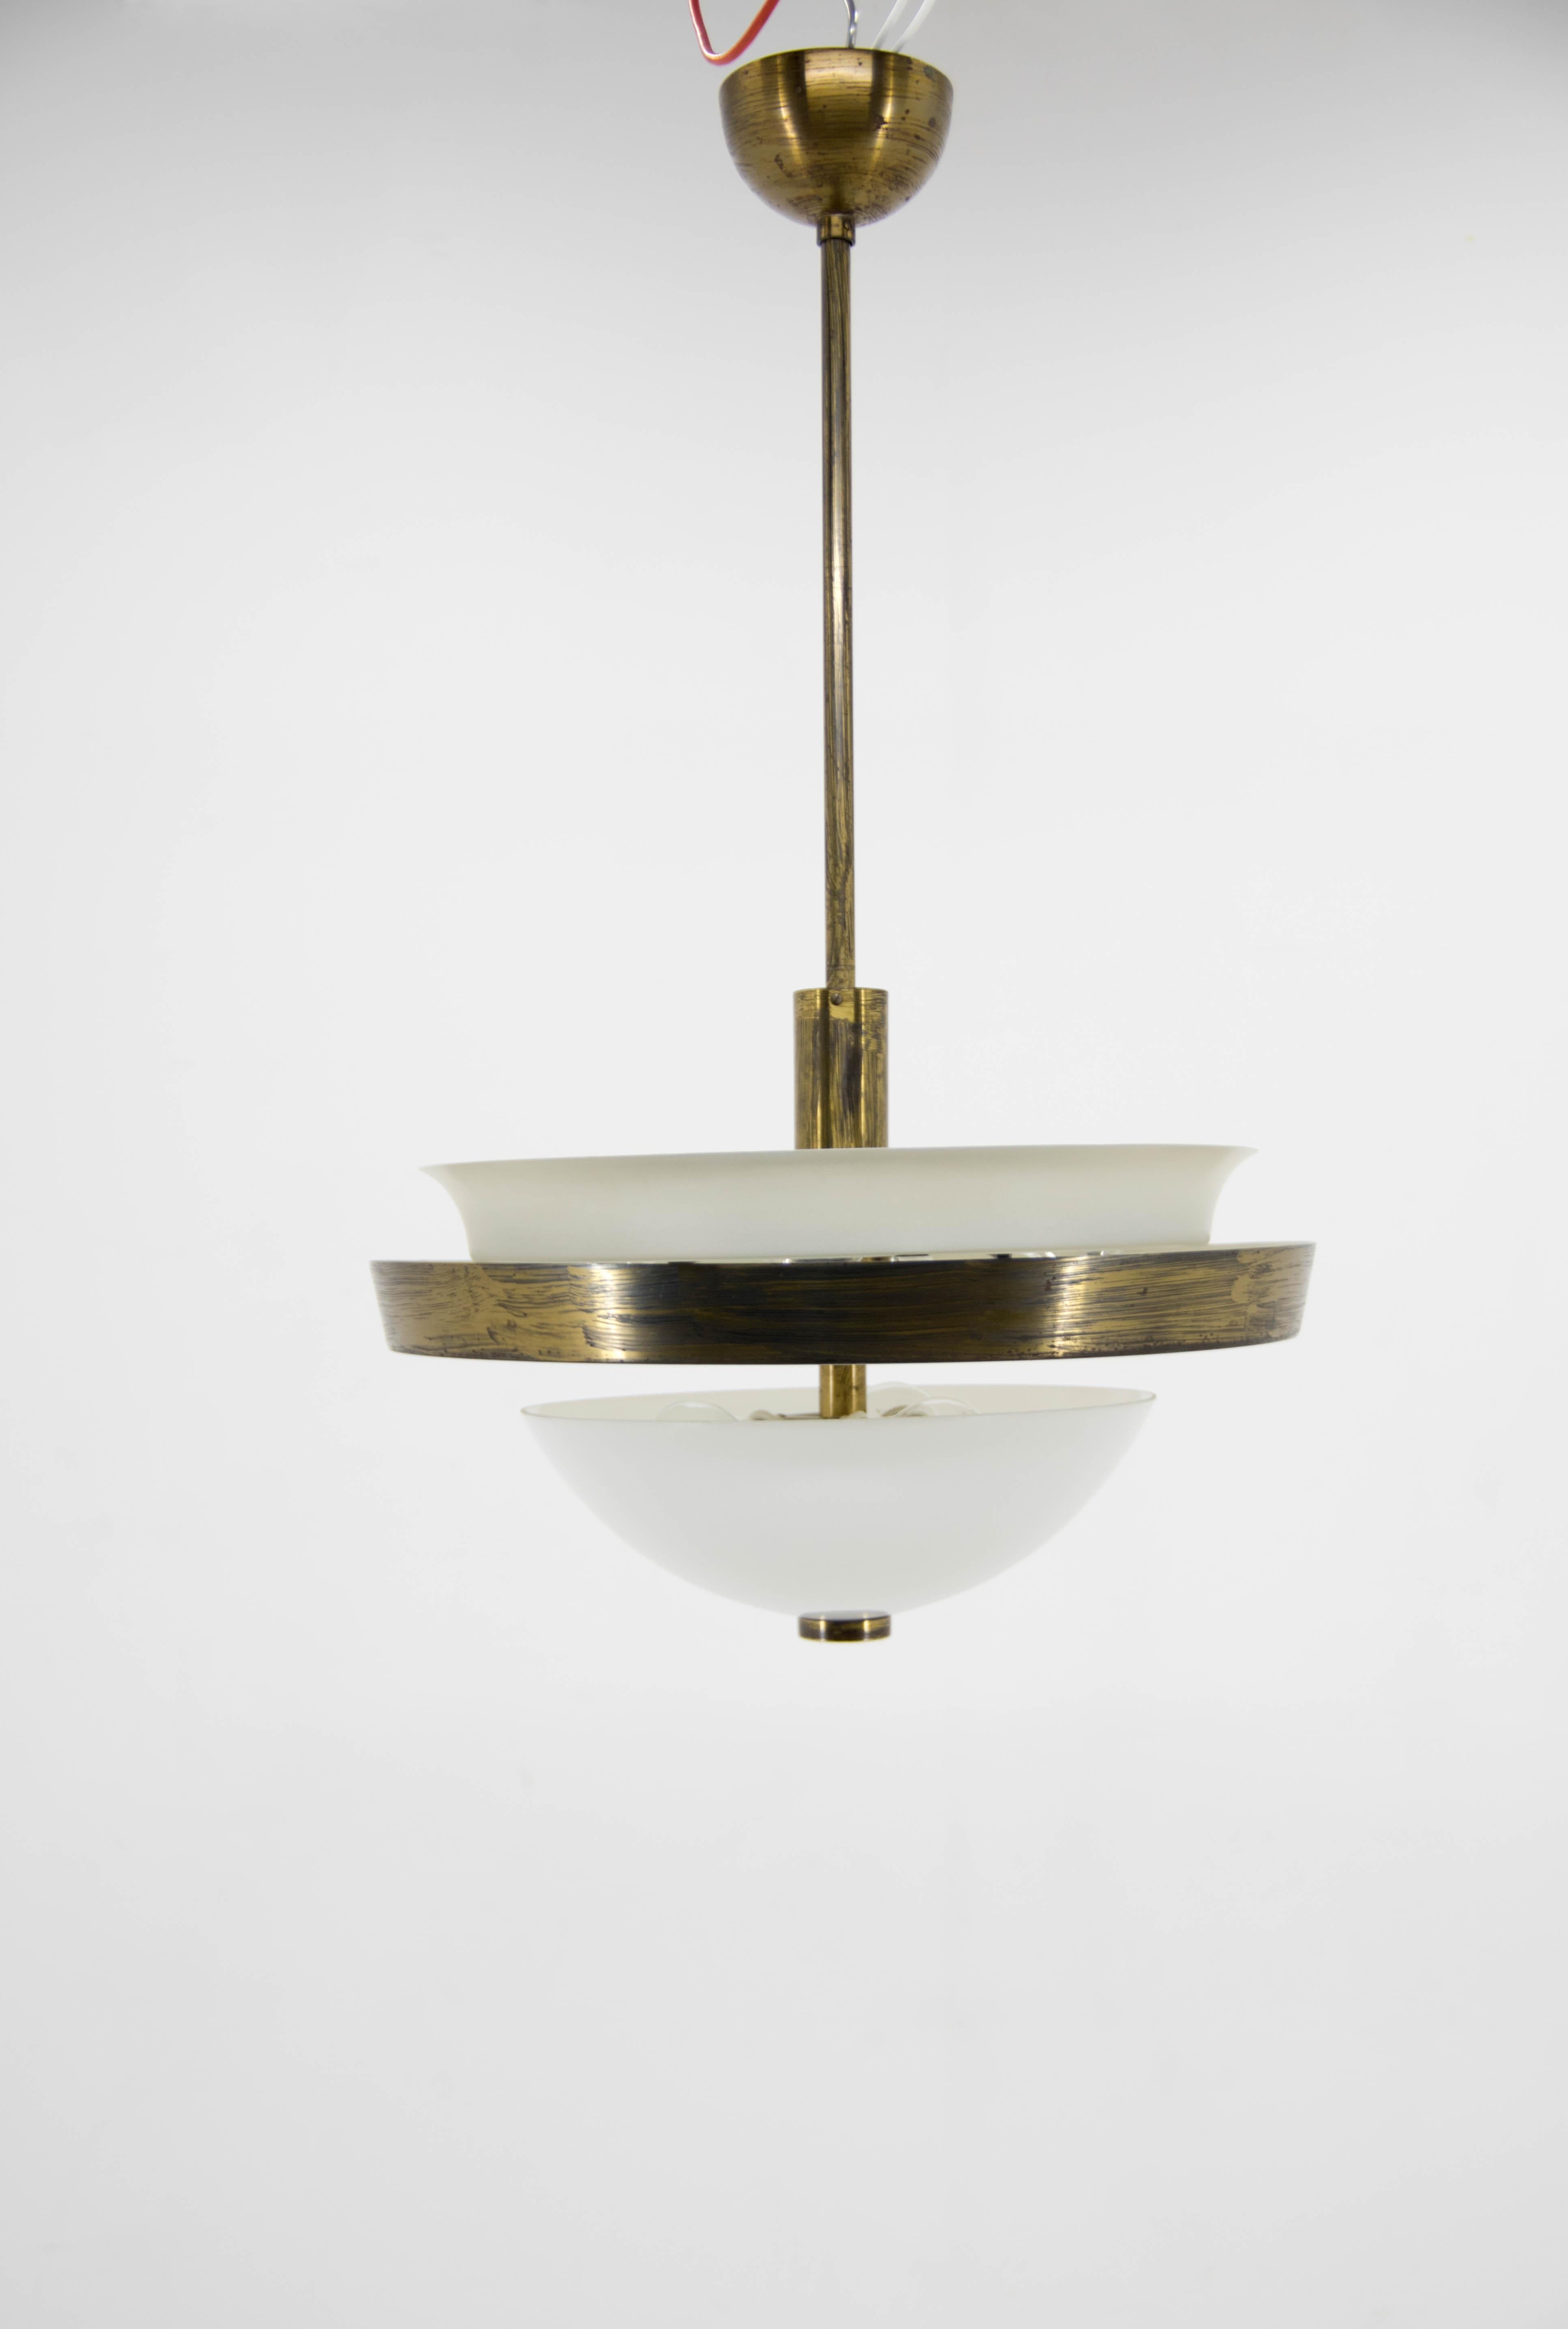 Very rare 7-flamming Bauhaus chandelier made in Czechoslovakia by IAS in 1930s. Perfect original condition. Lacquered brass shows the traces of painted brush. Original white paint in perfect condition. Opaline glass shade. Rewired: two separate